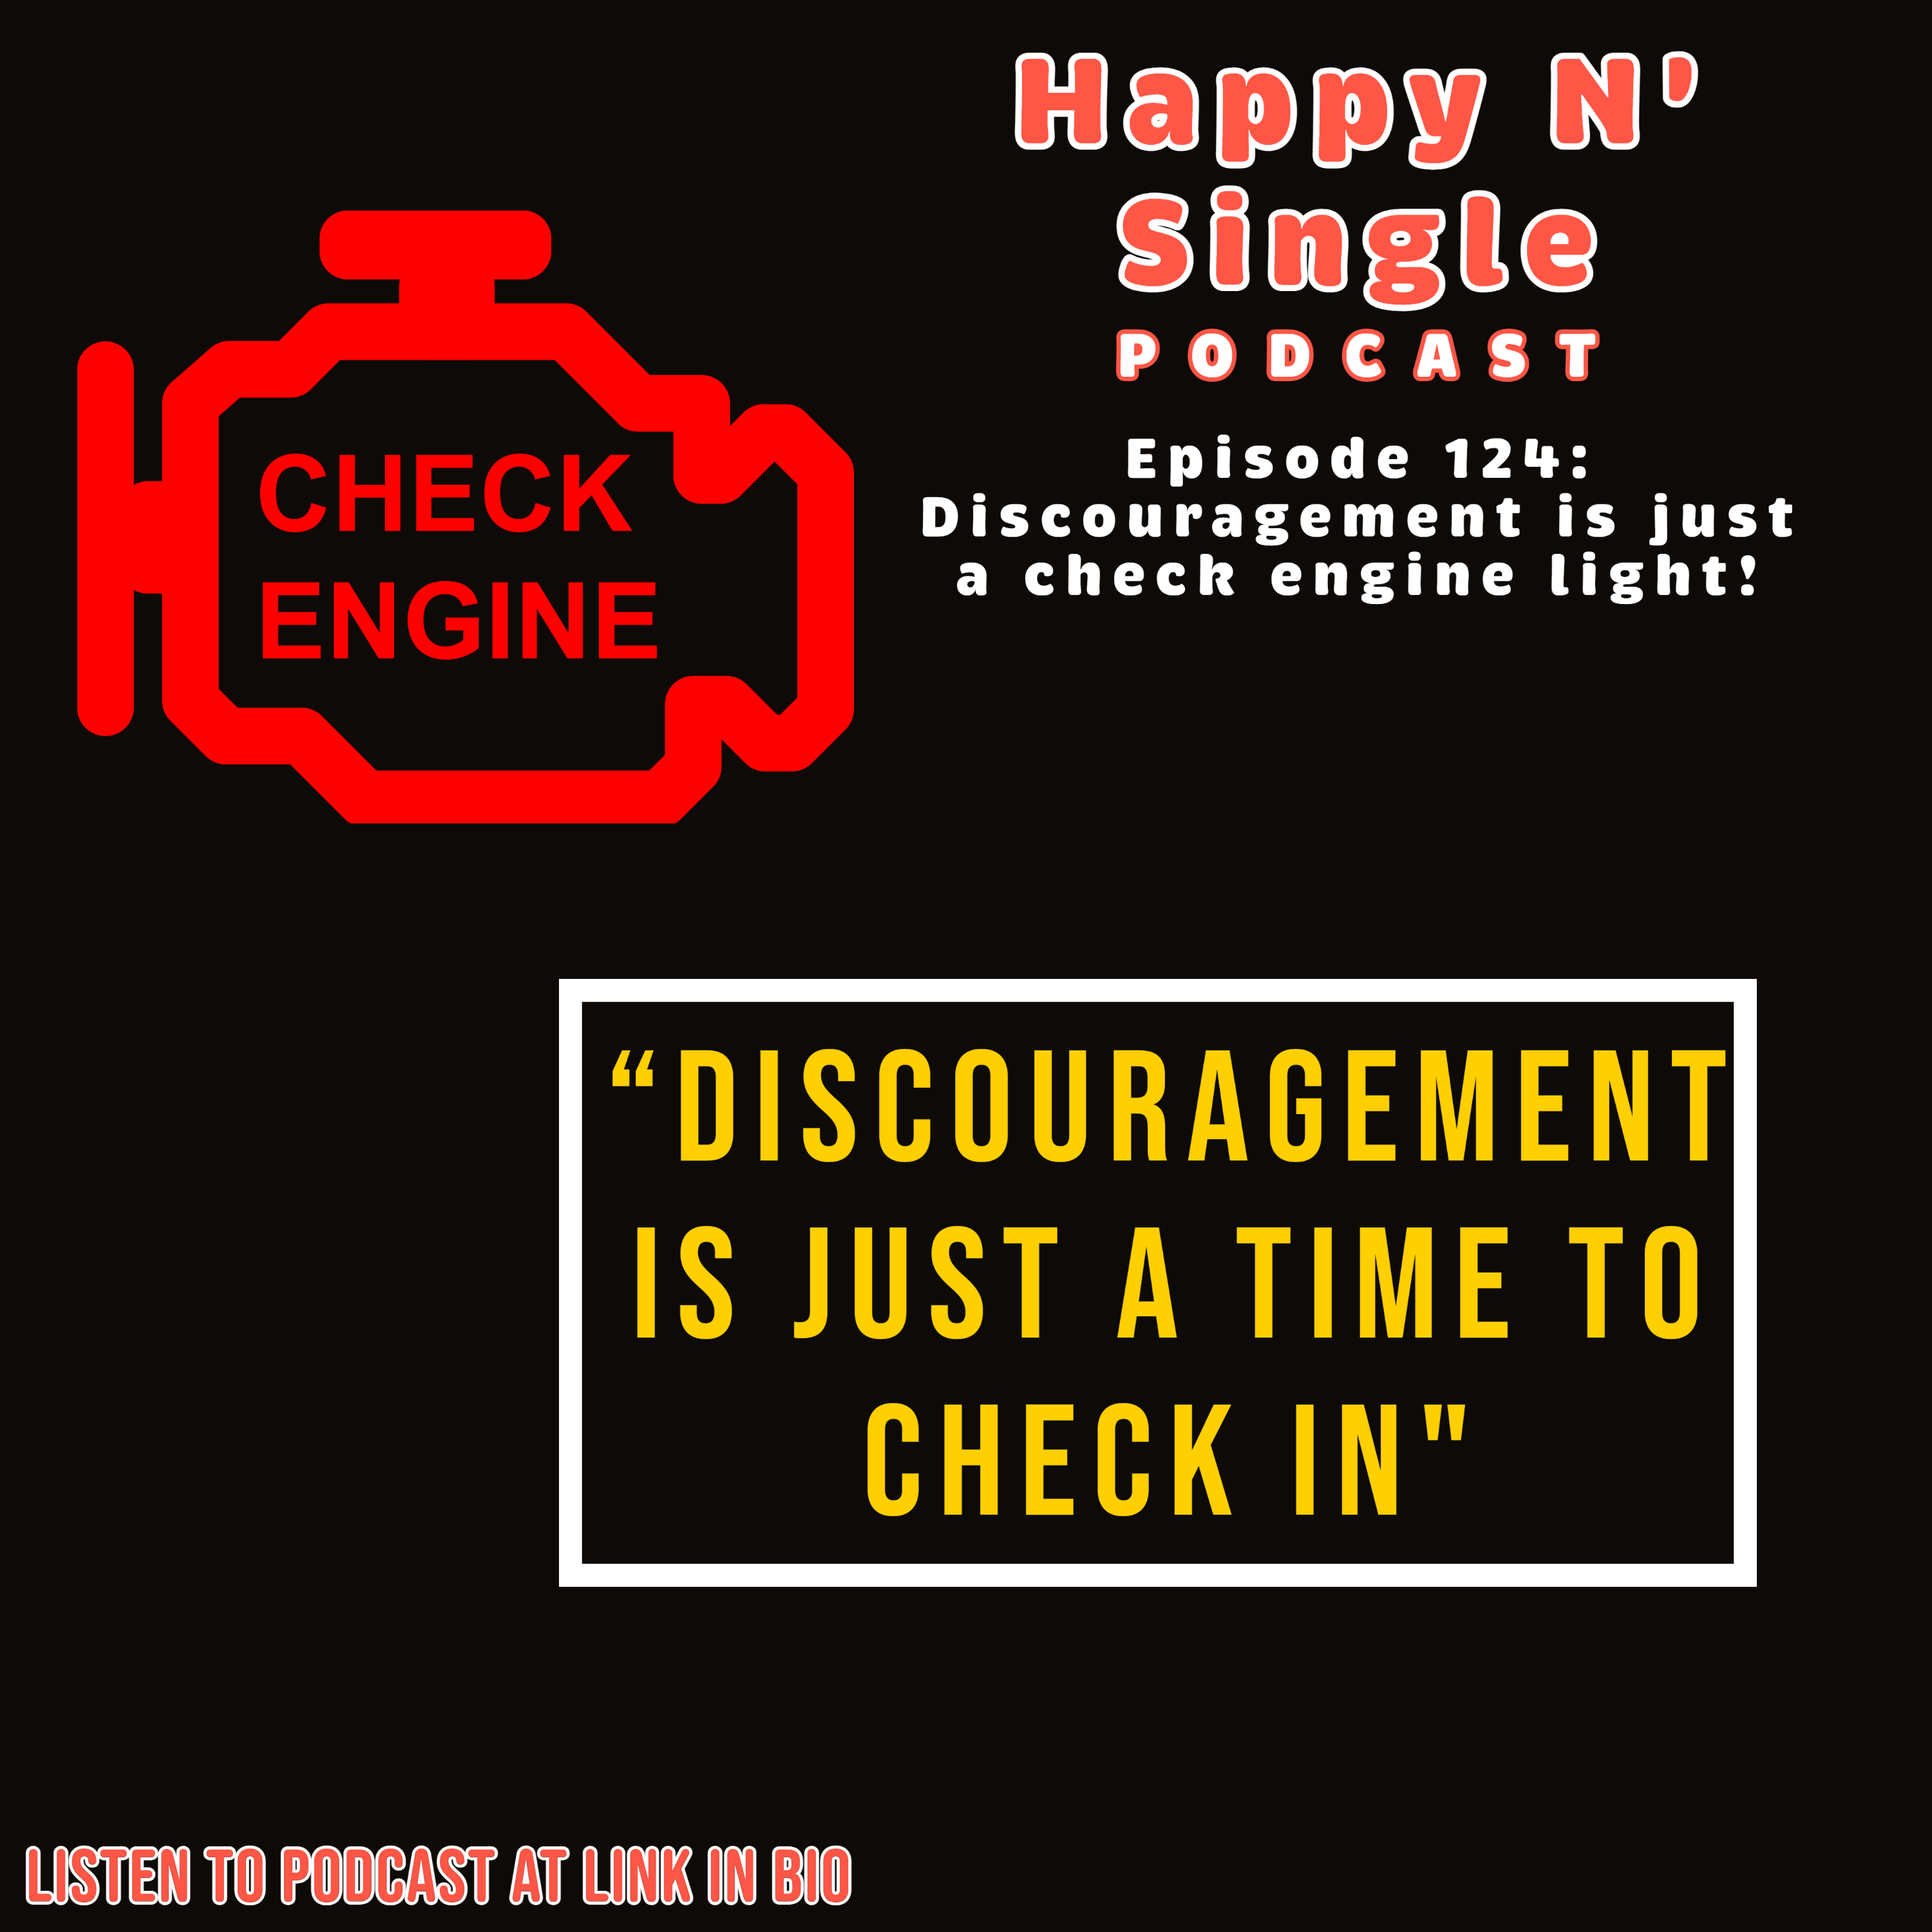 Discouragement Is A Check Engine Light